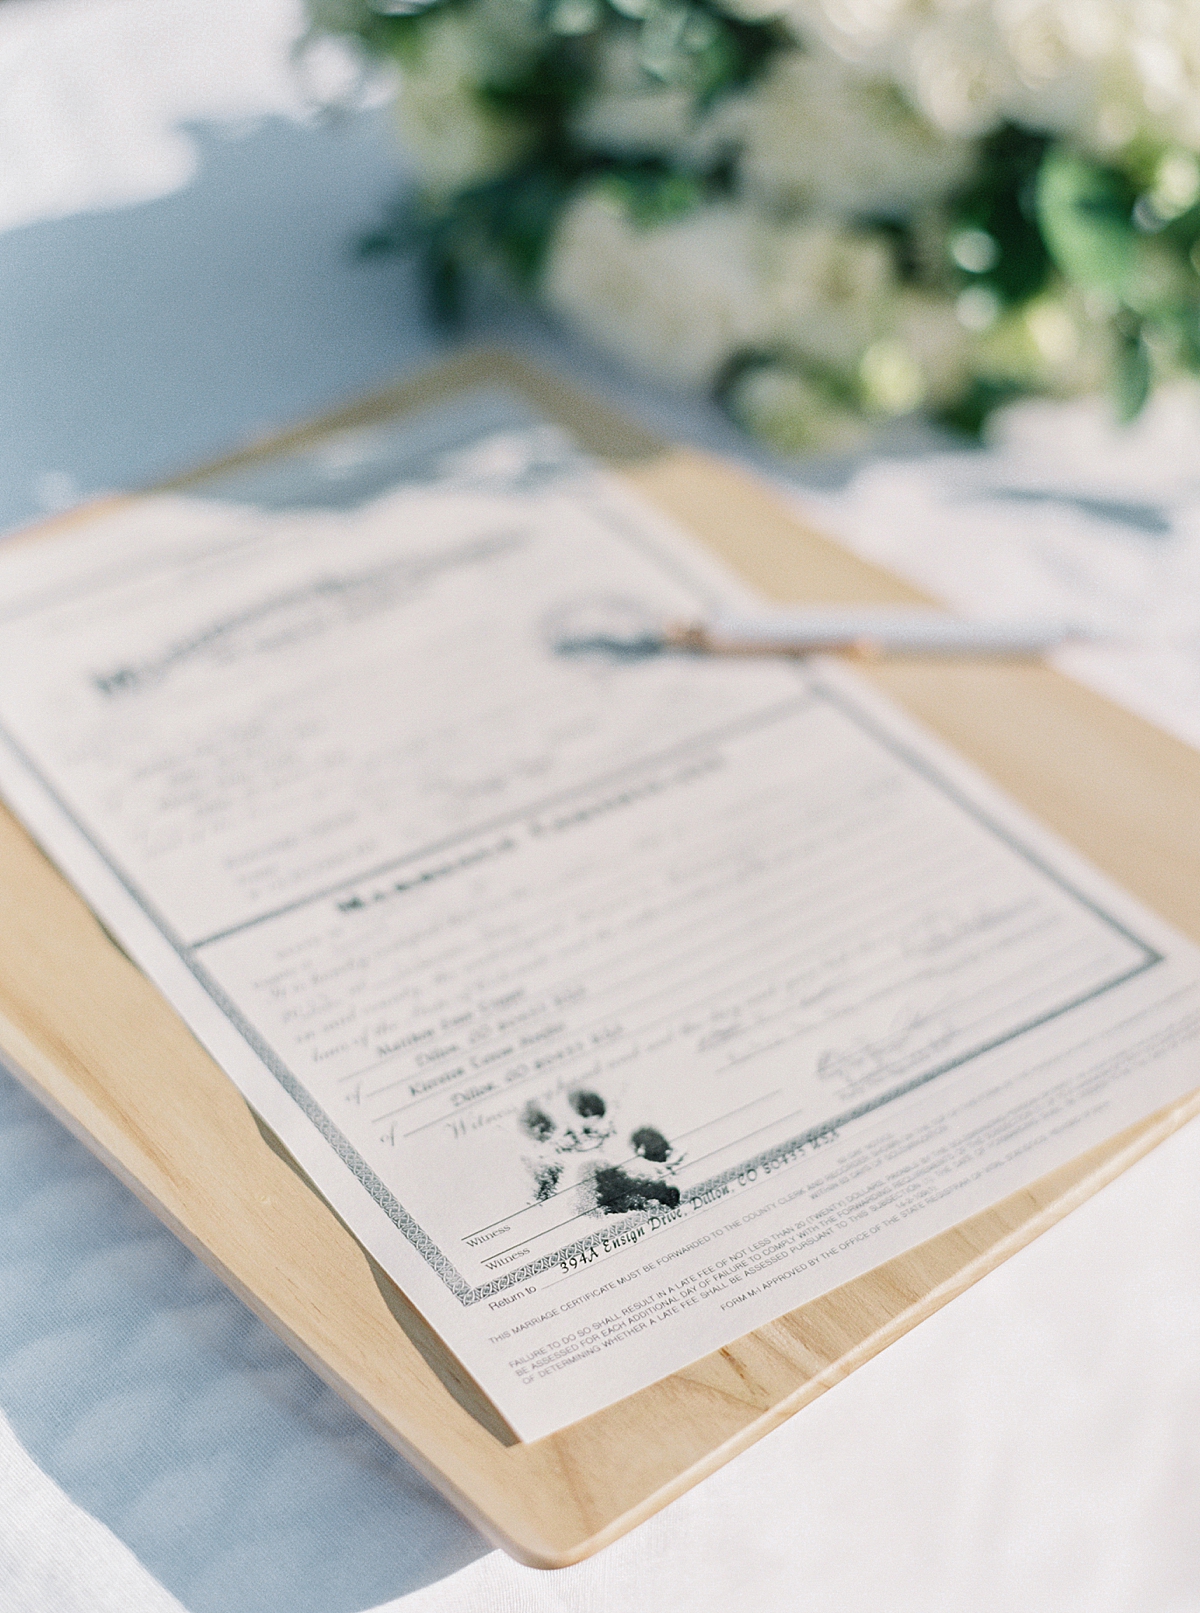 a colorado marriage license with paw print signature